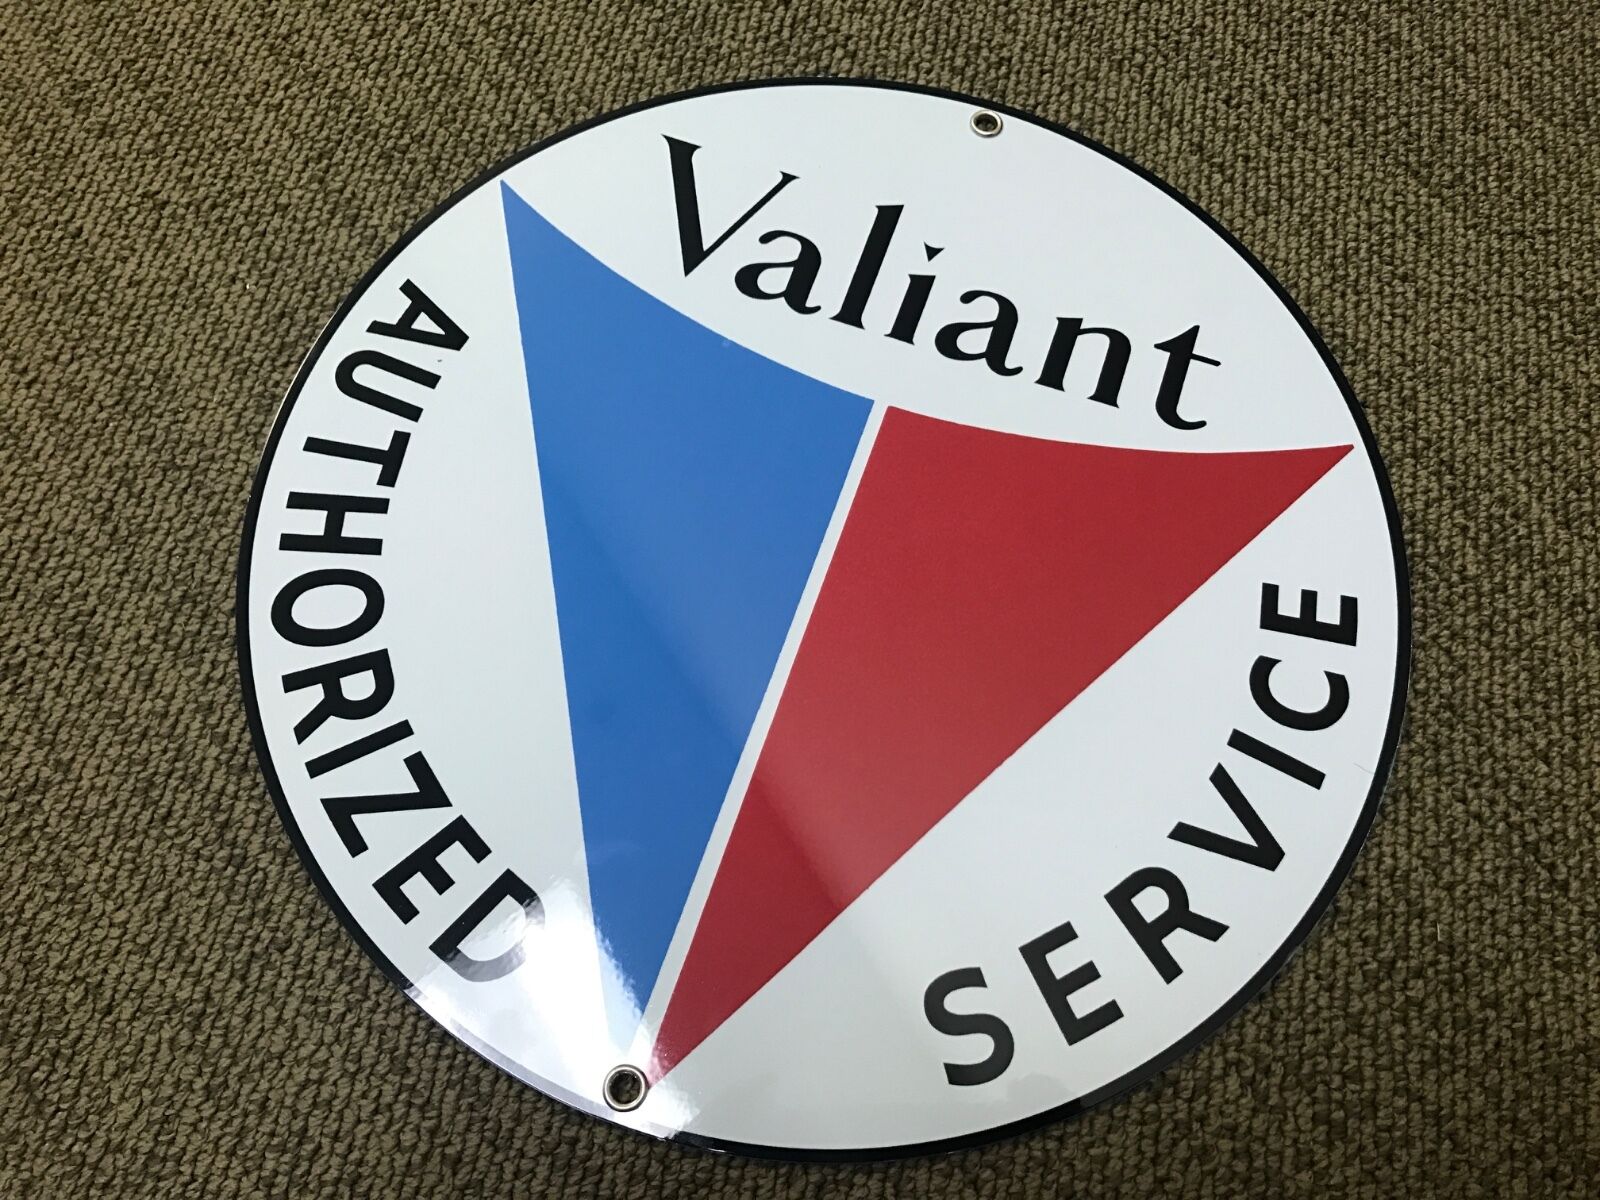 Valiant service vintage Plymouth Chrysler round sign reproduction blue